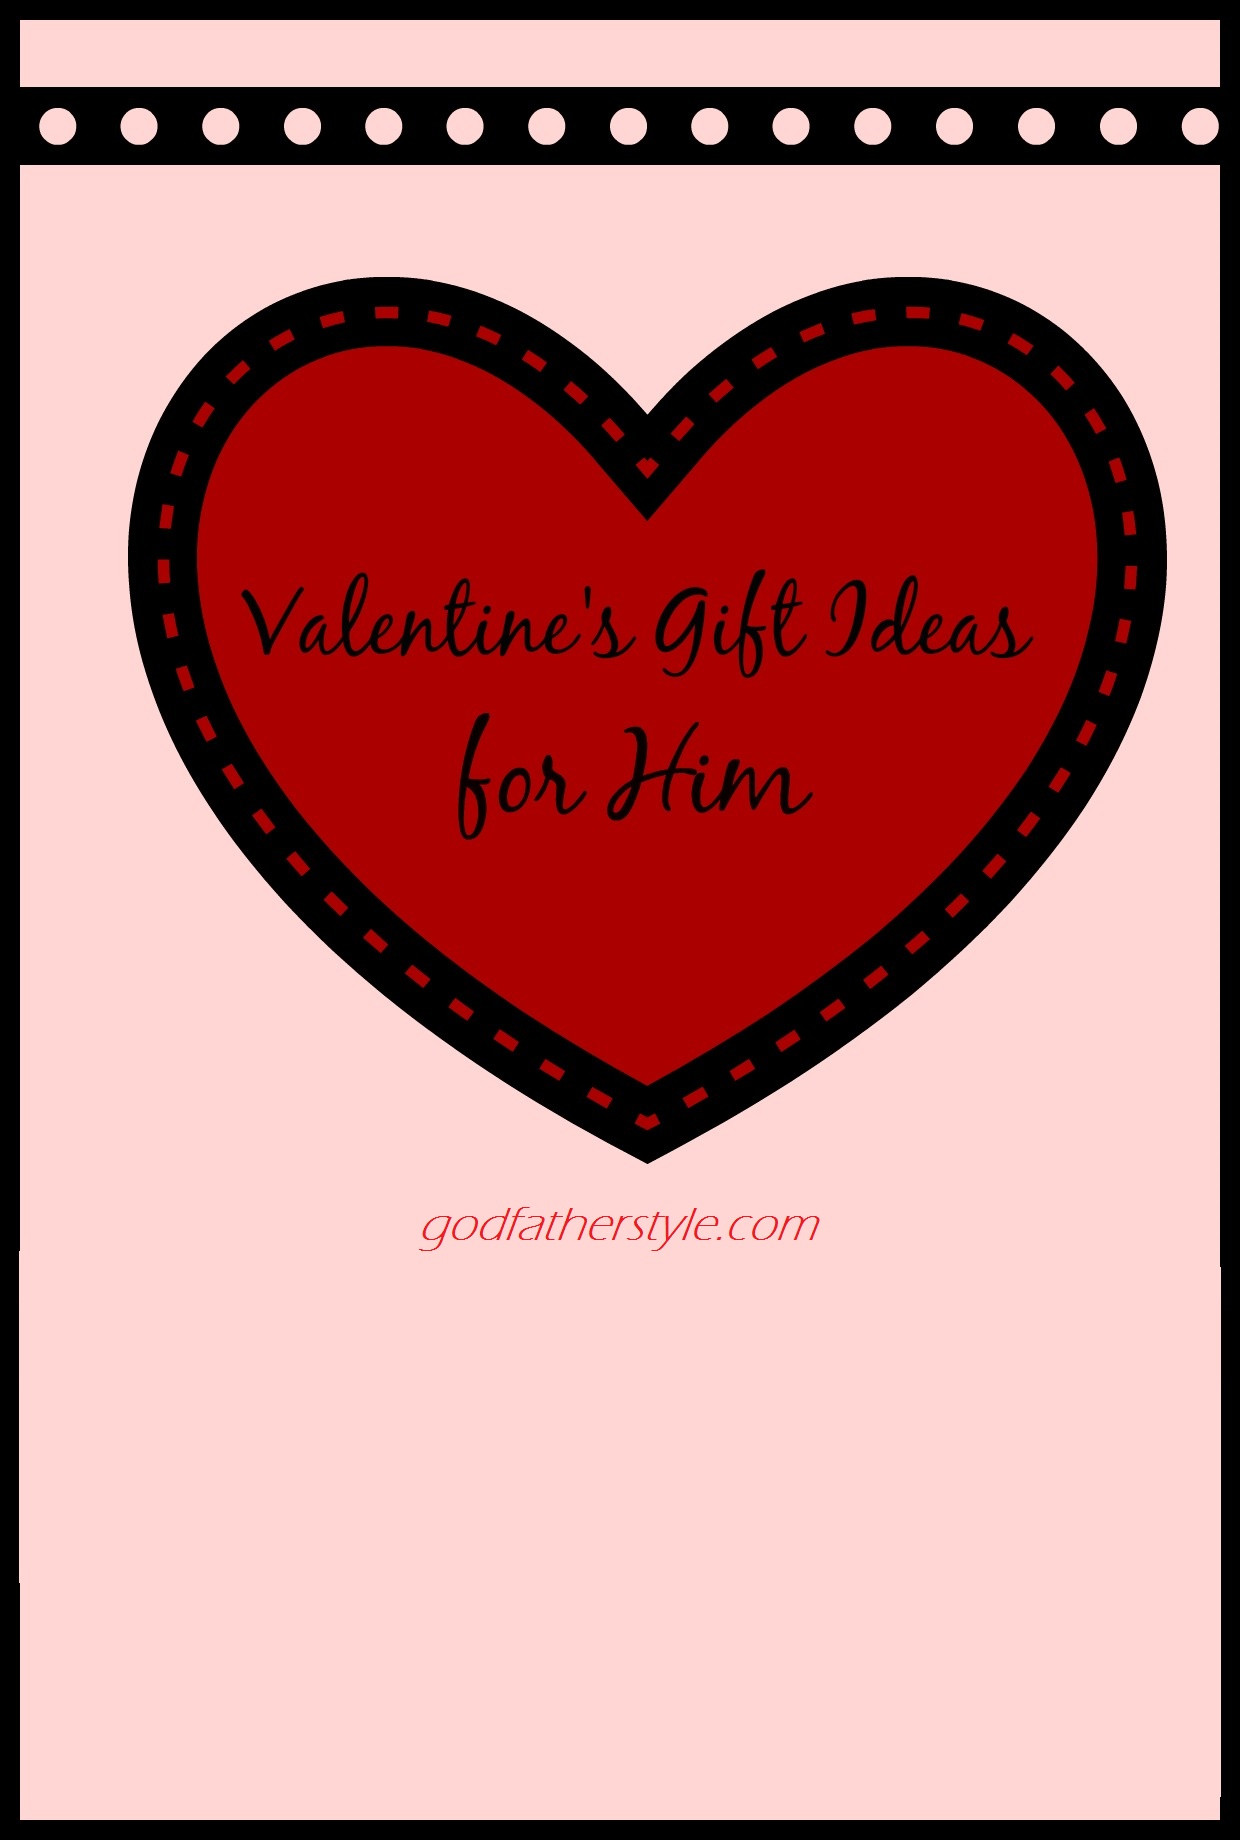 Great Valentines Gift Ideas
 Gift Ideas For Him Valentines Valentine s Gift Ideas for